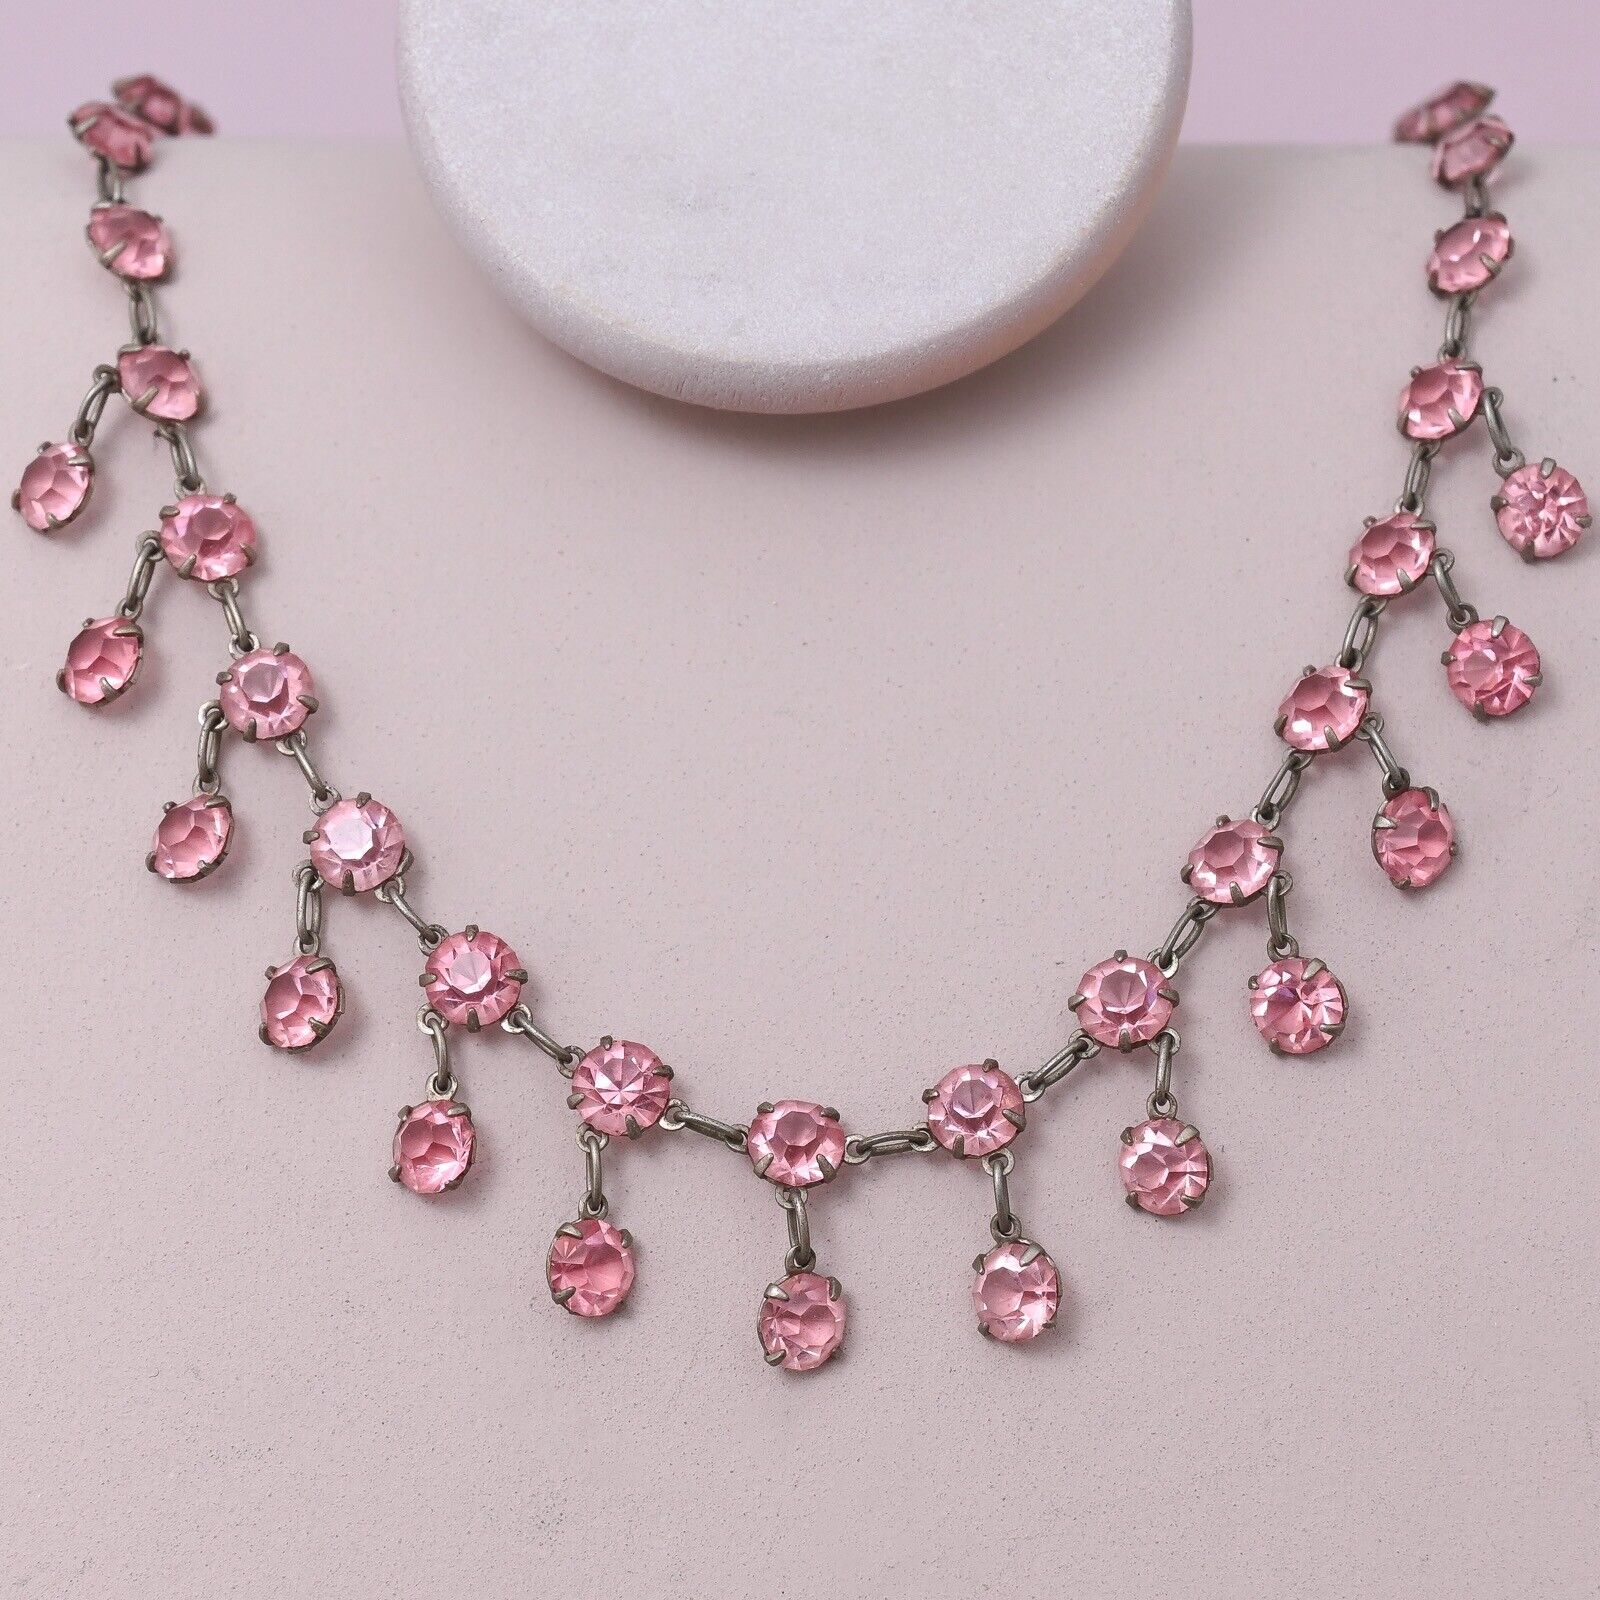 Antique 1920s Art Deco TINY Open Back PINK Crystal Glass Dangle Necklace